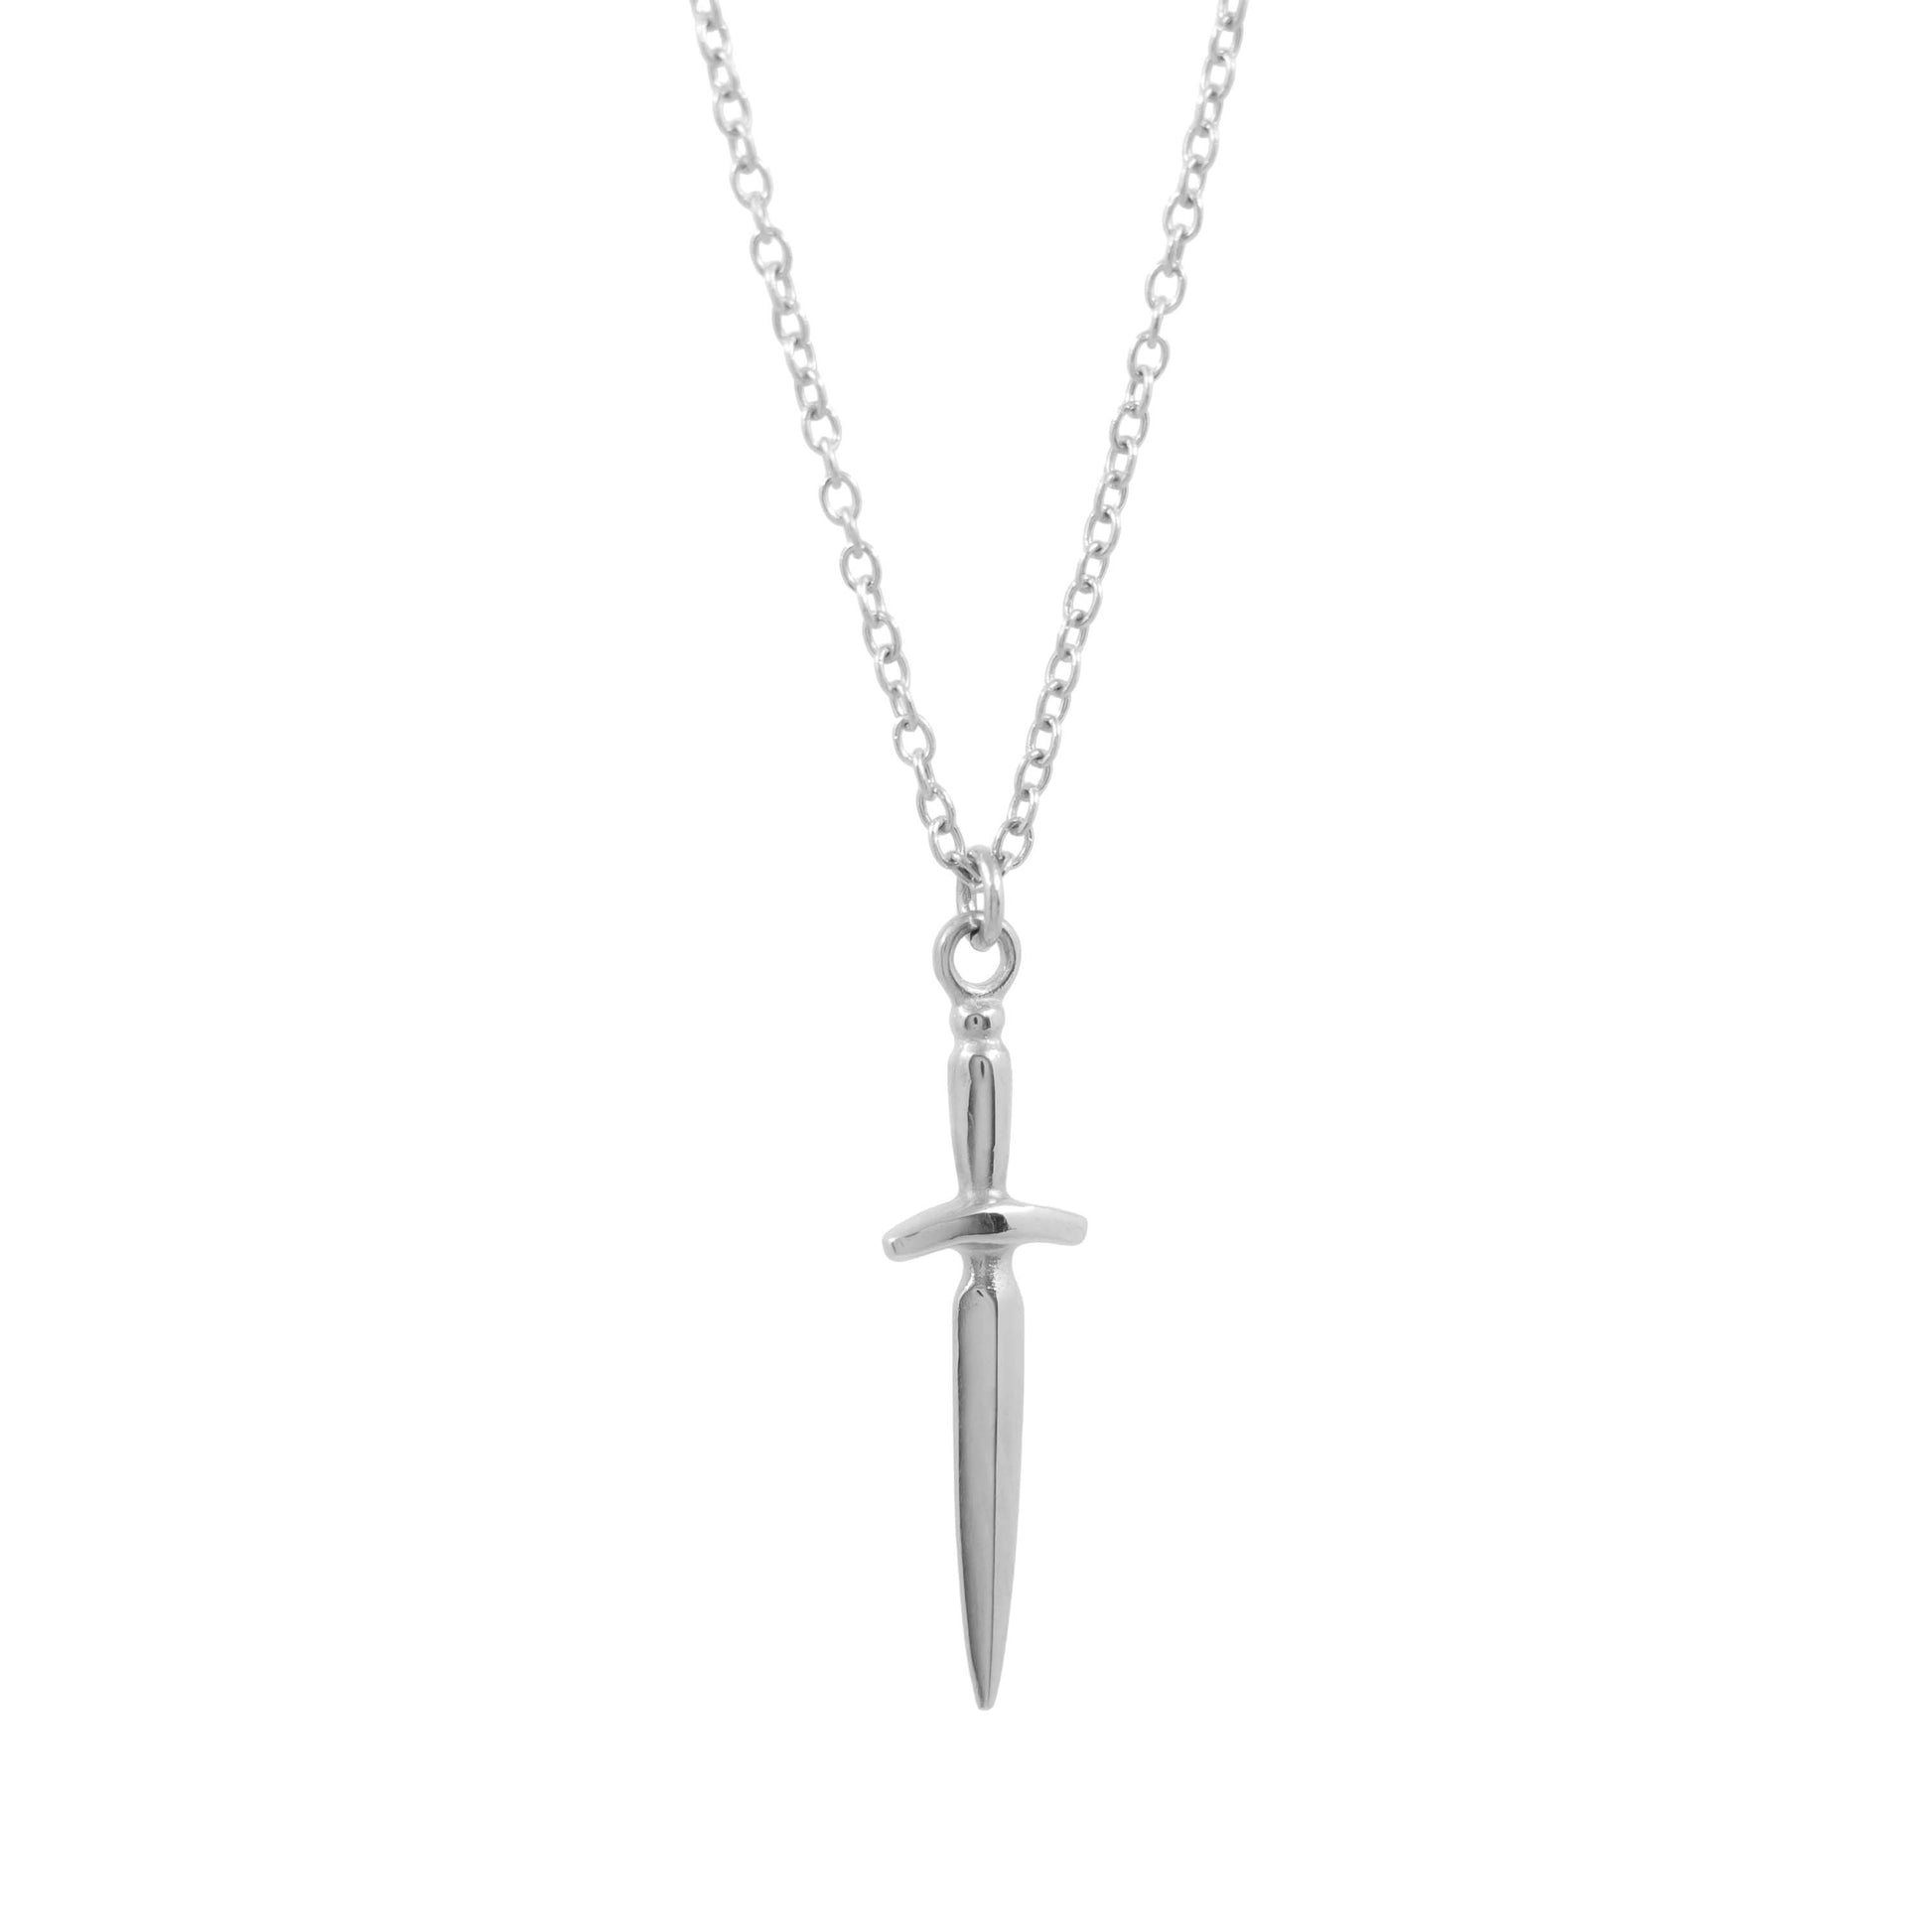 Small Dagger Necklace in Sterling Silver - Futaba Hayashi